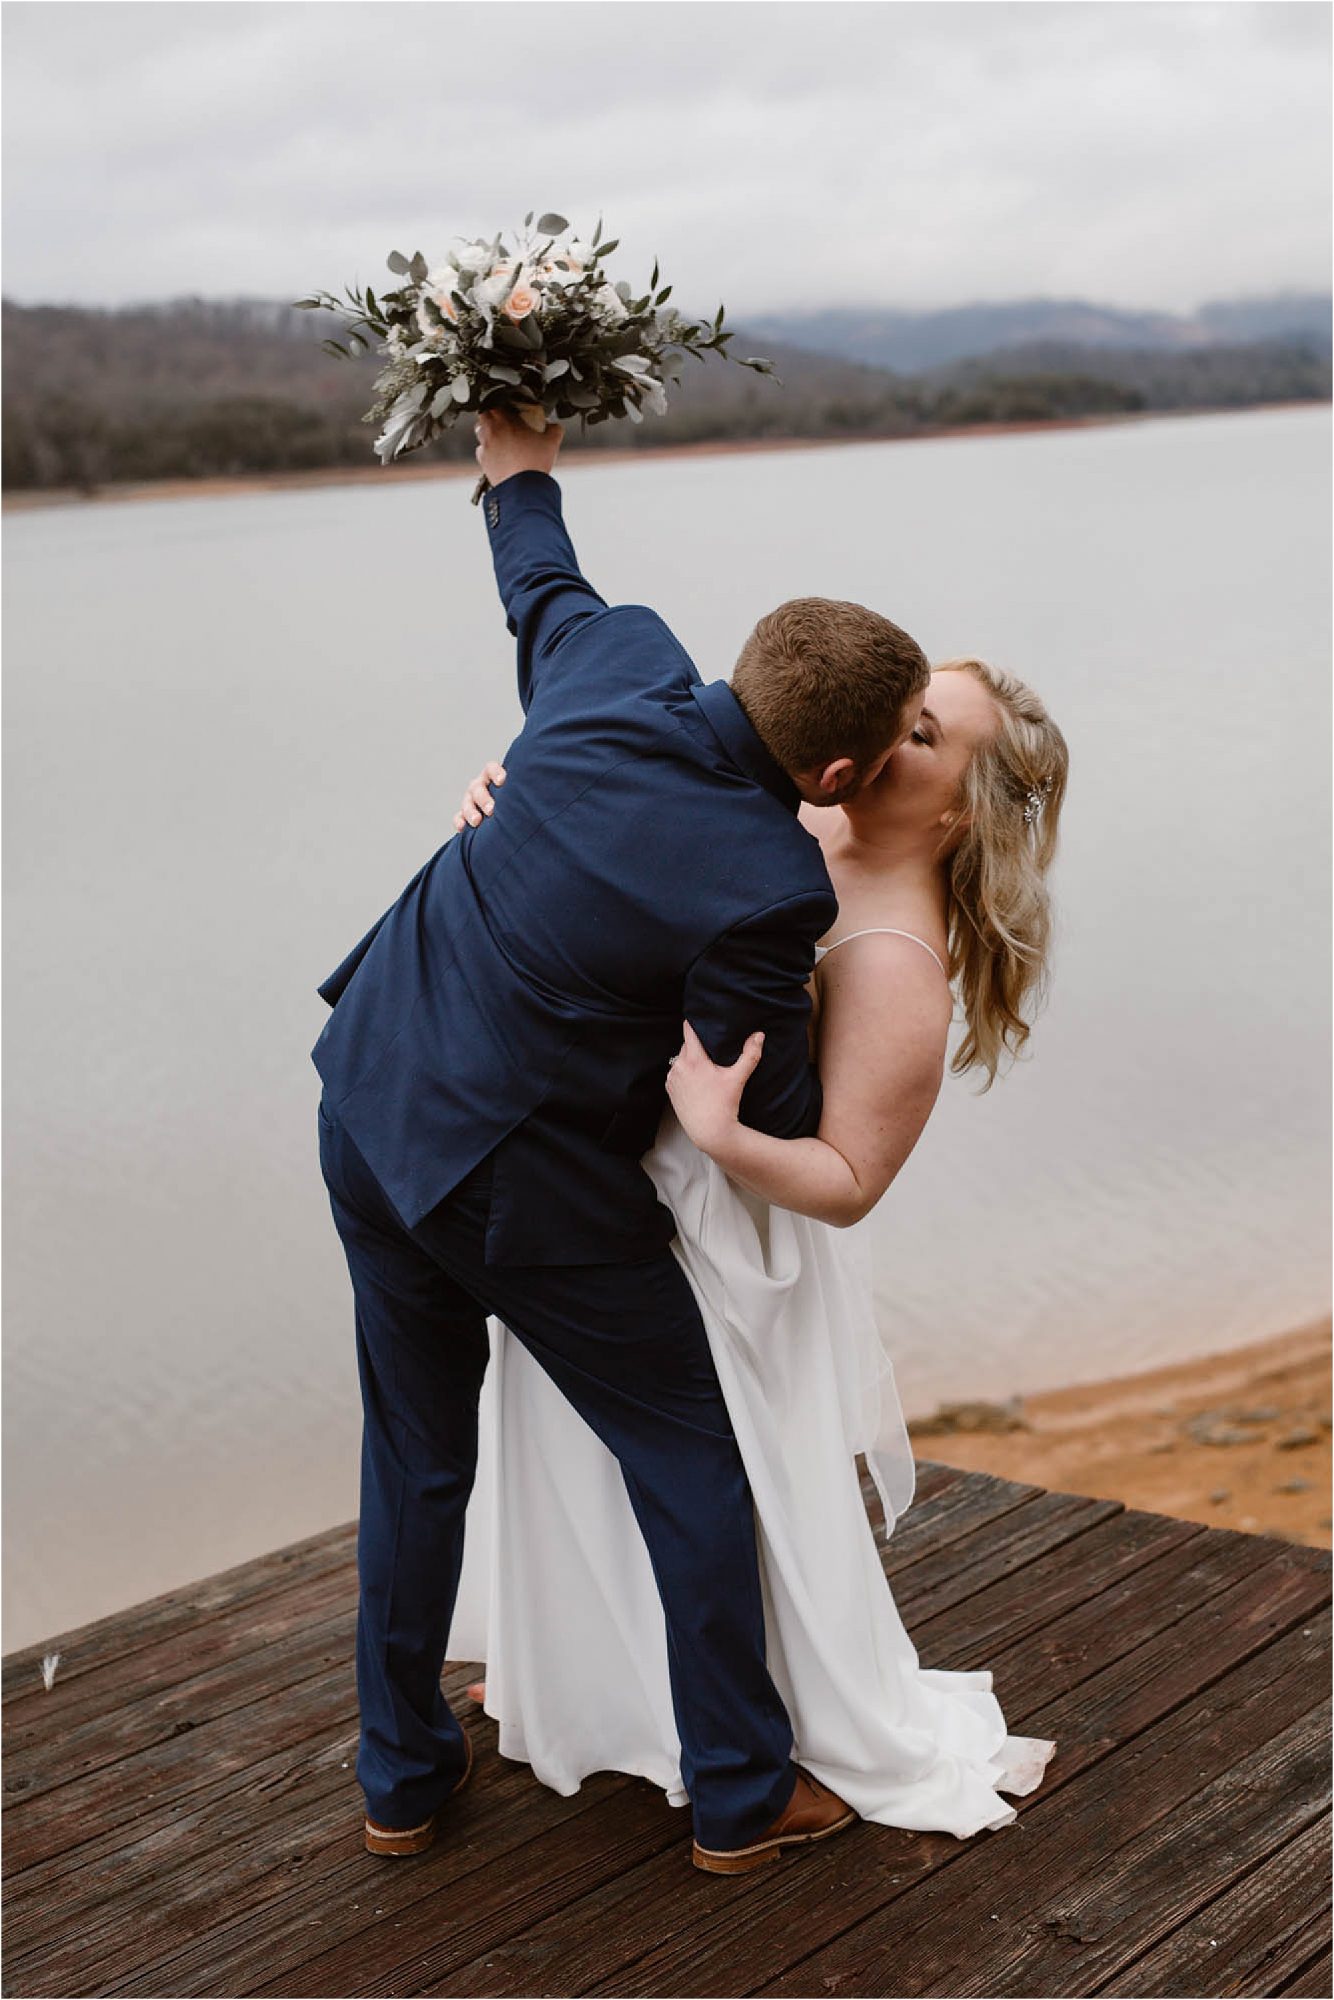 groom kissing bride while holding bouquet